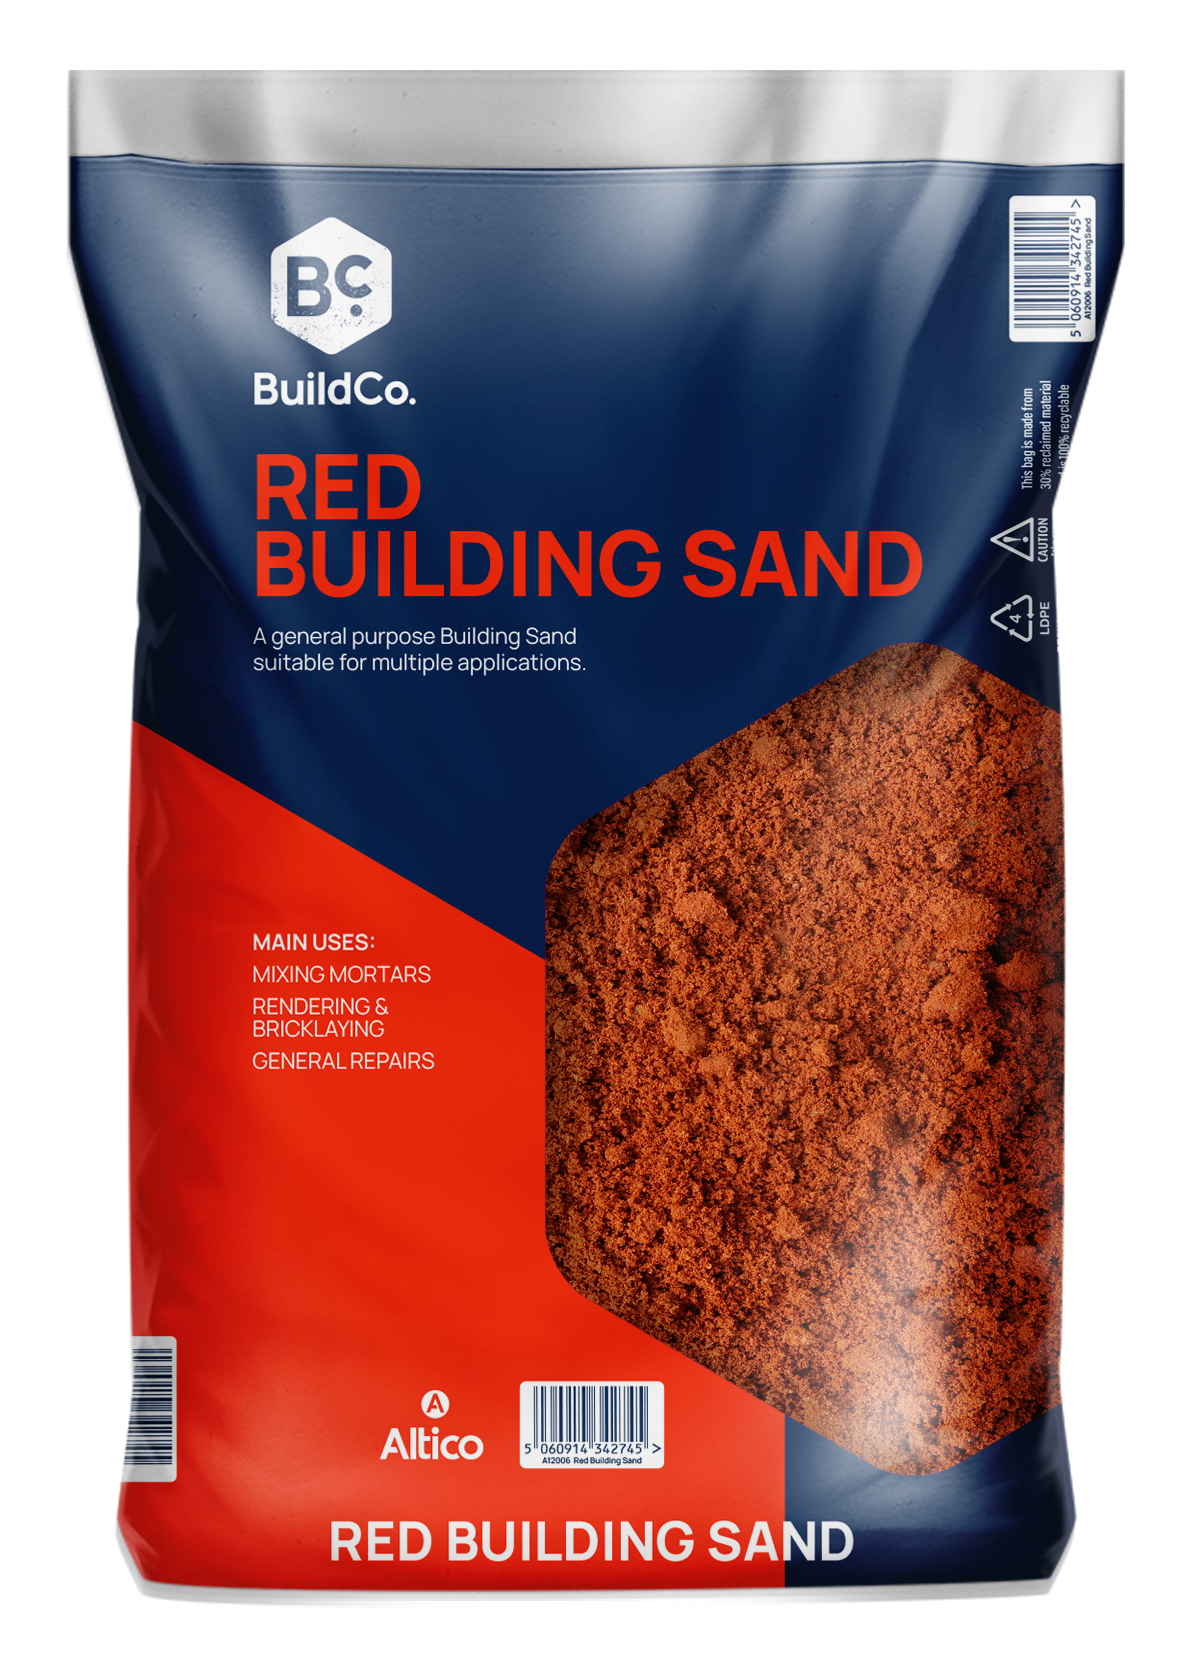 Red Building Sand